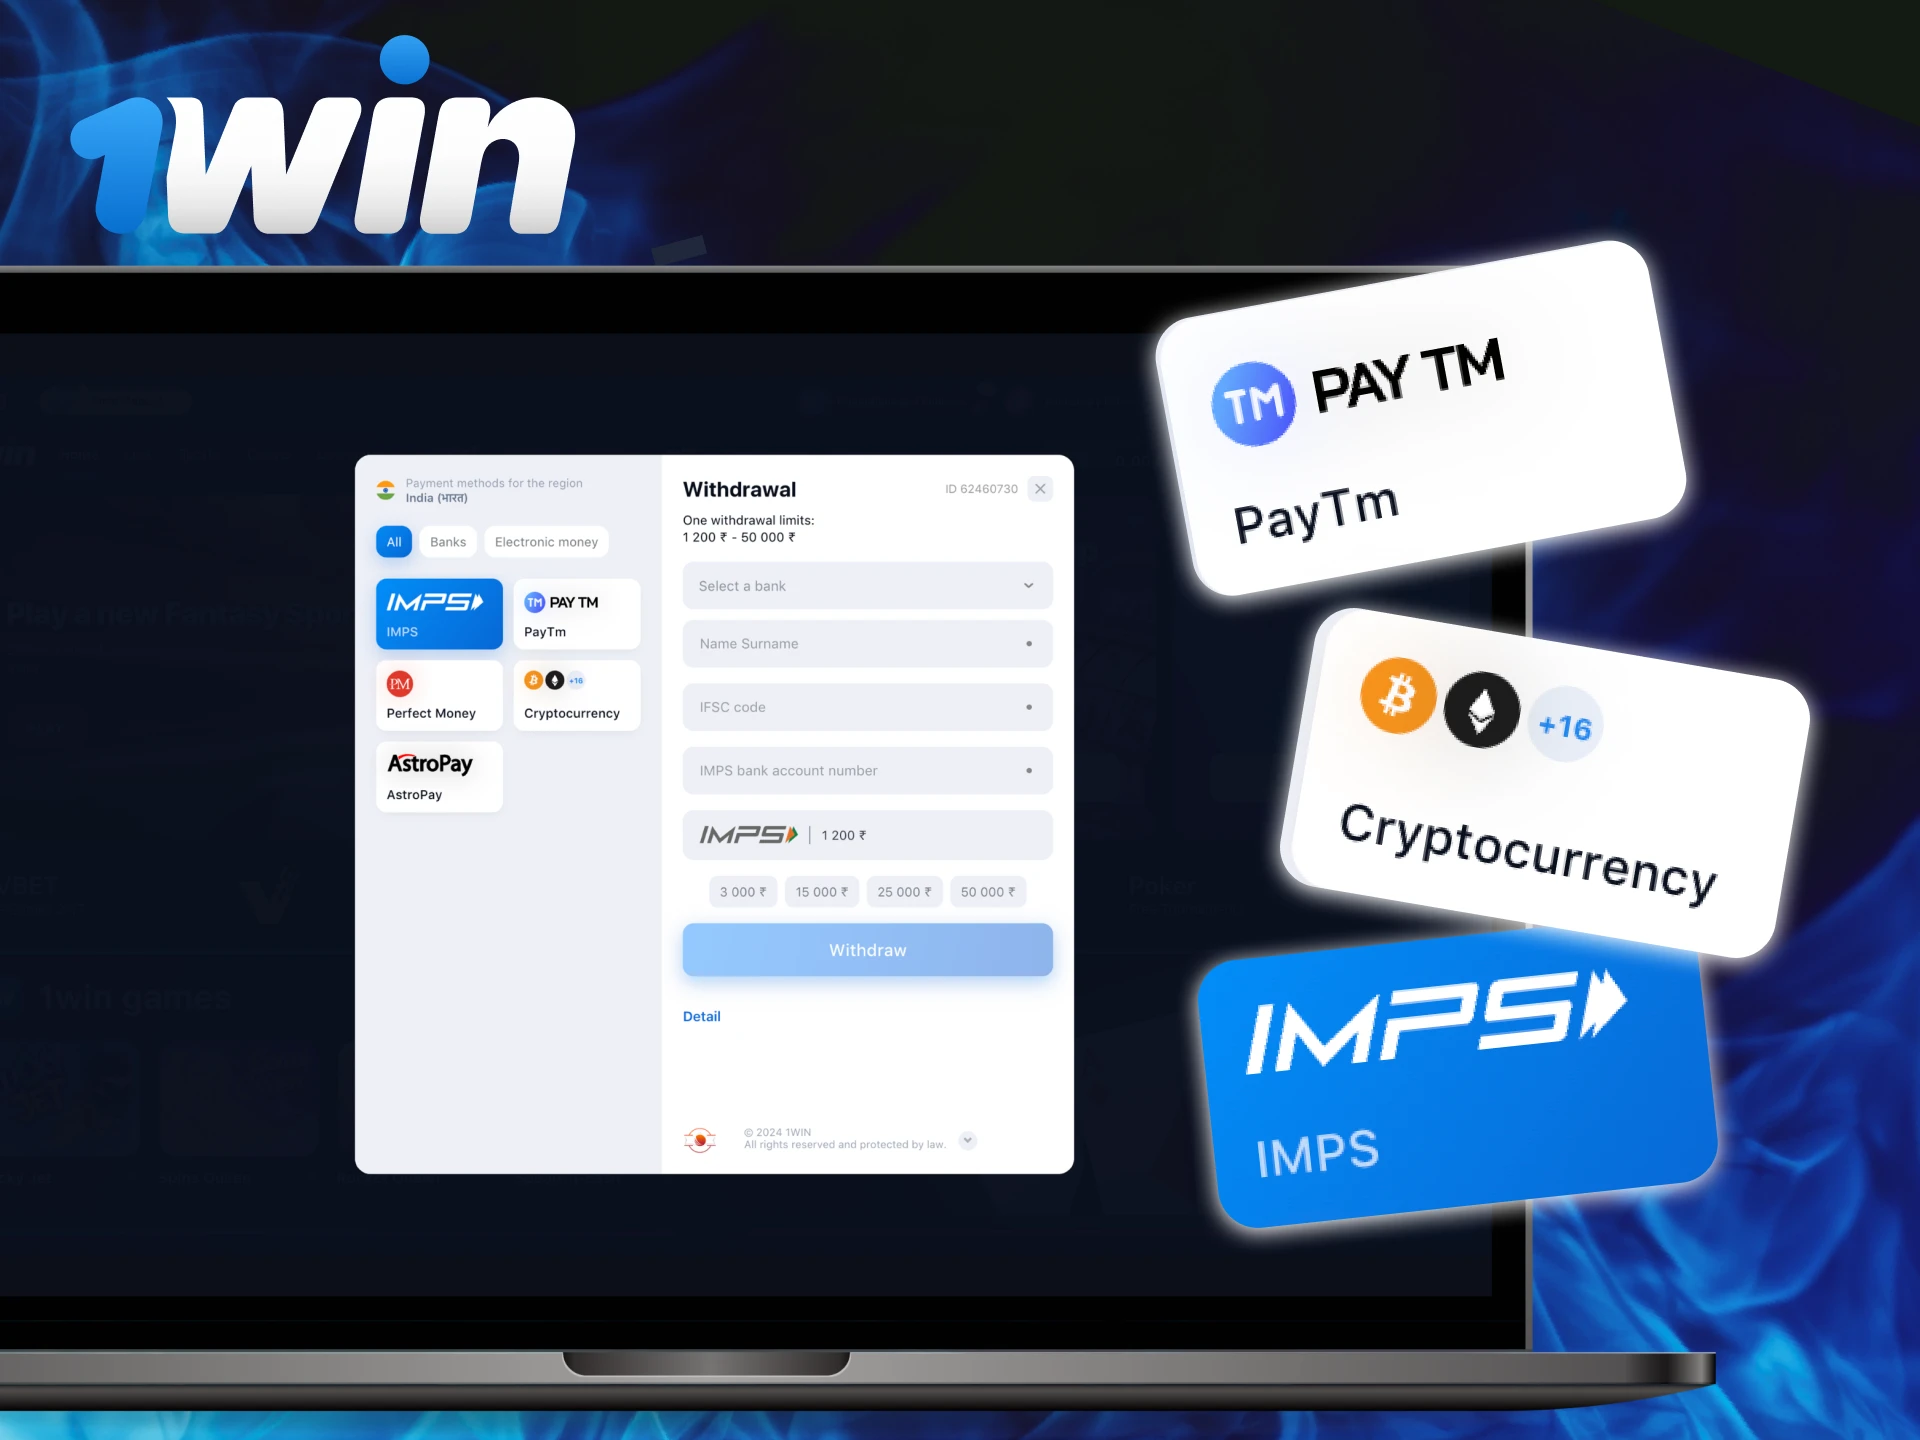 Instructions on how to withdraw money from your account at 1Win casino.